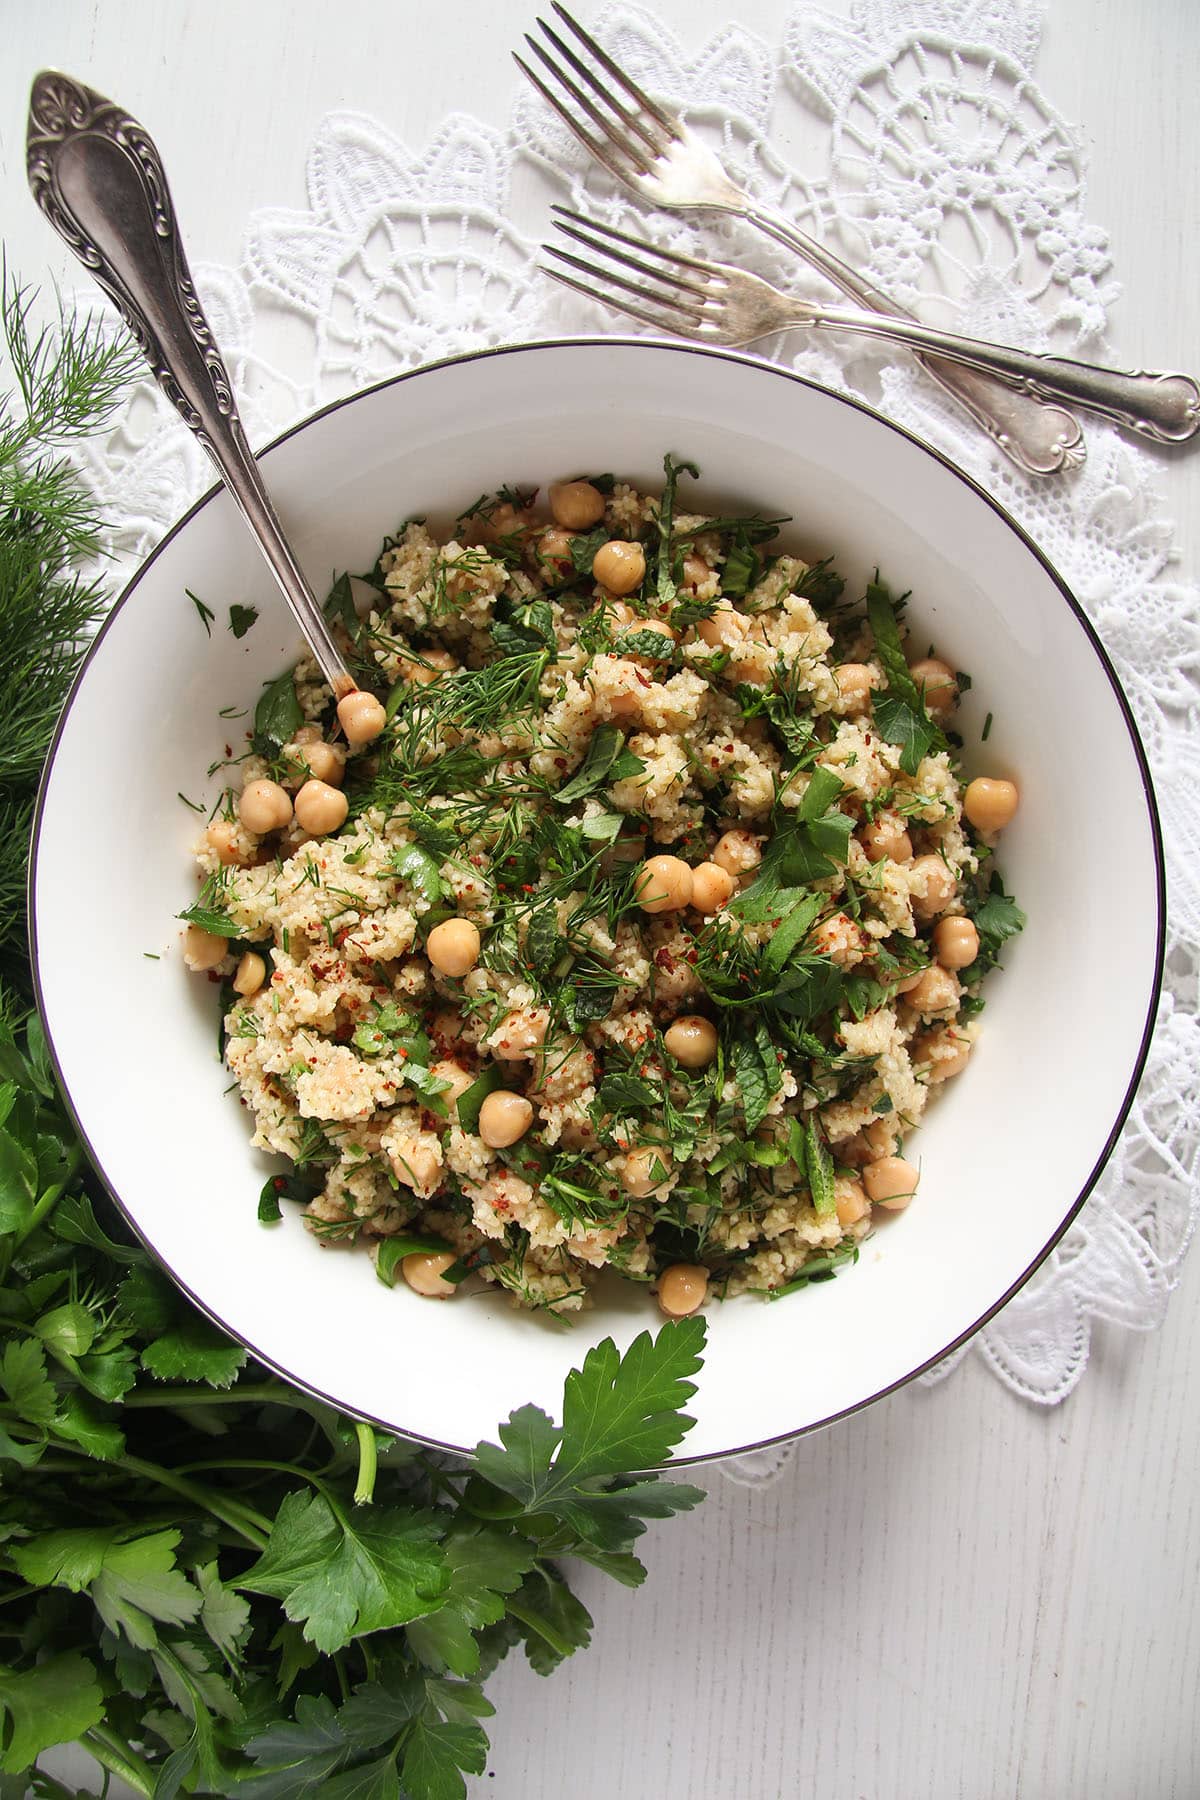 bulgur wheat salad with chickpeas and herbs in a bowl with a spoon sticking into it.